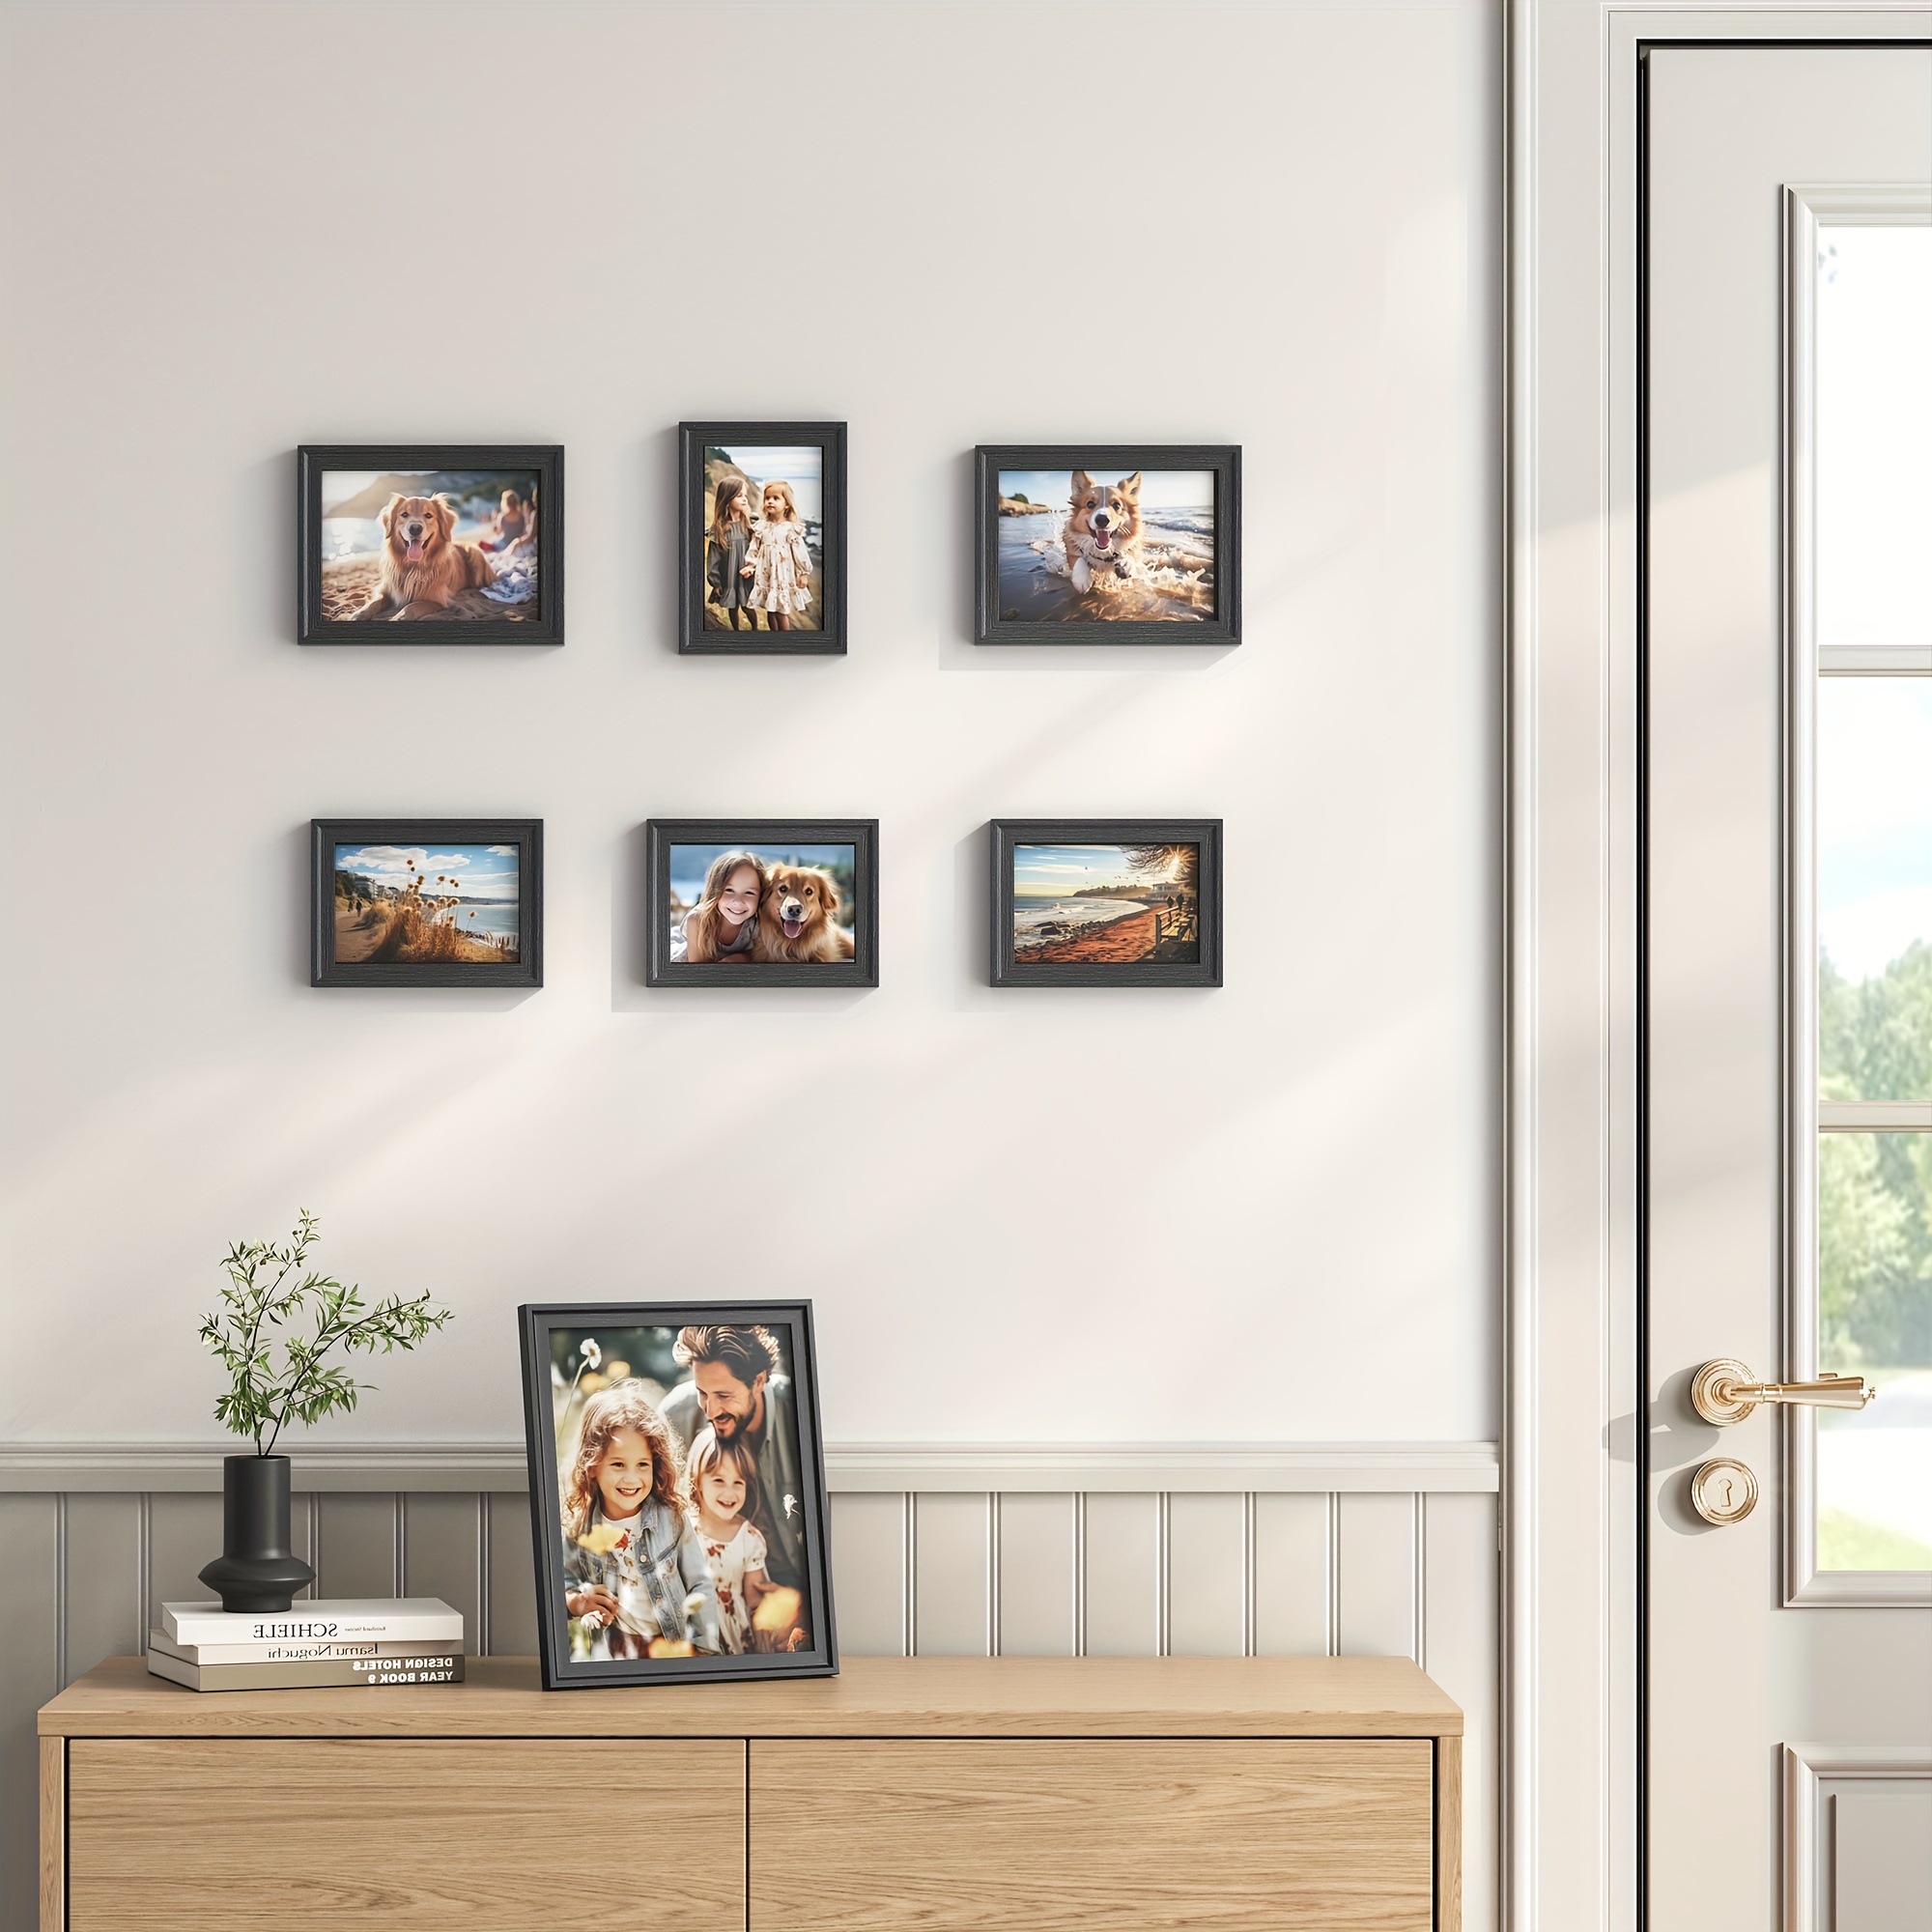 

Picture Frames With 10 Mats Set Of 7 Collage Photo Frames With 1 8x10, 2 5x7, 4 4x6 Frames, Hanging Or Tabletop Display 9 Non-trace Nails